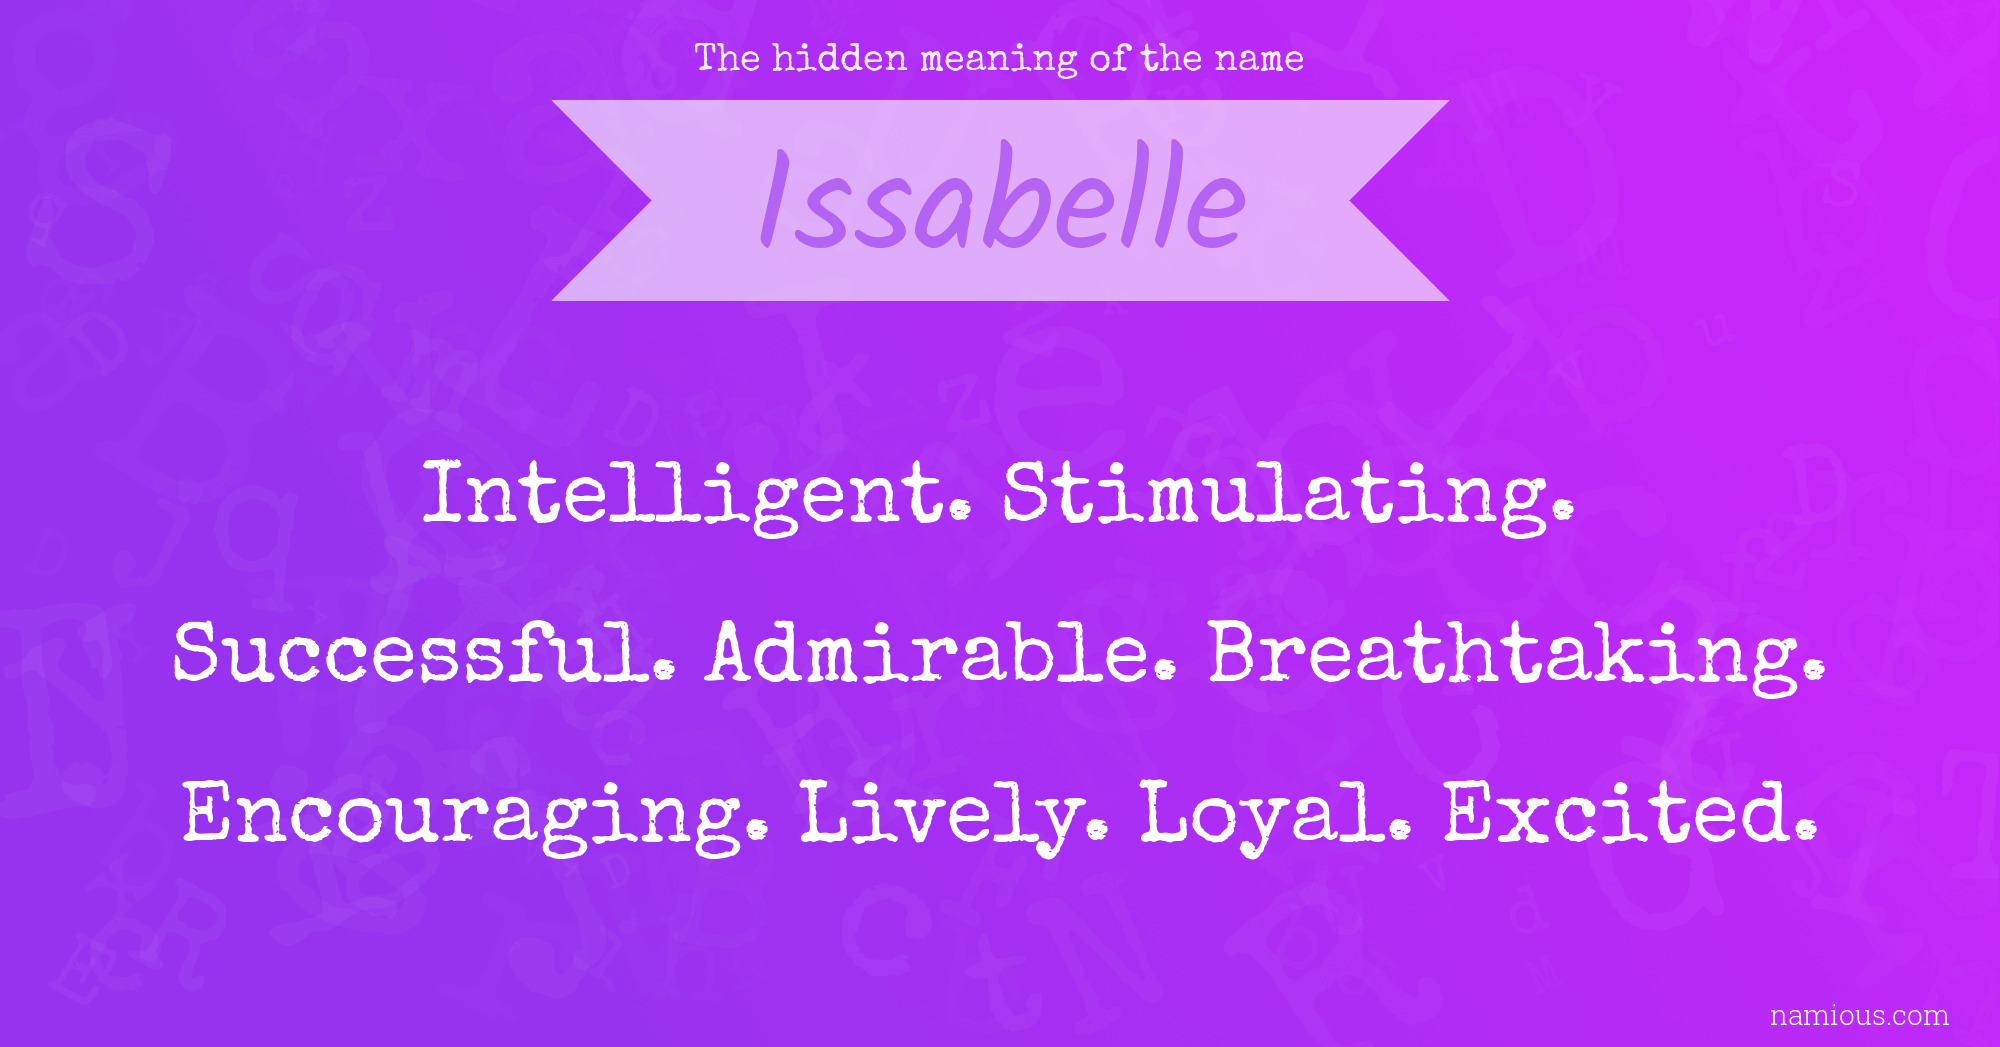 The hidden meaning of the name Issabelle